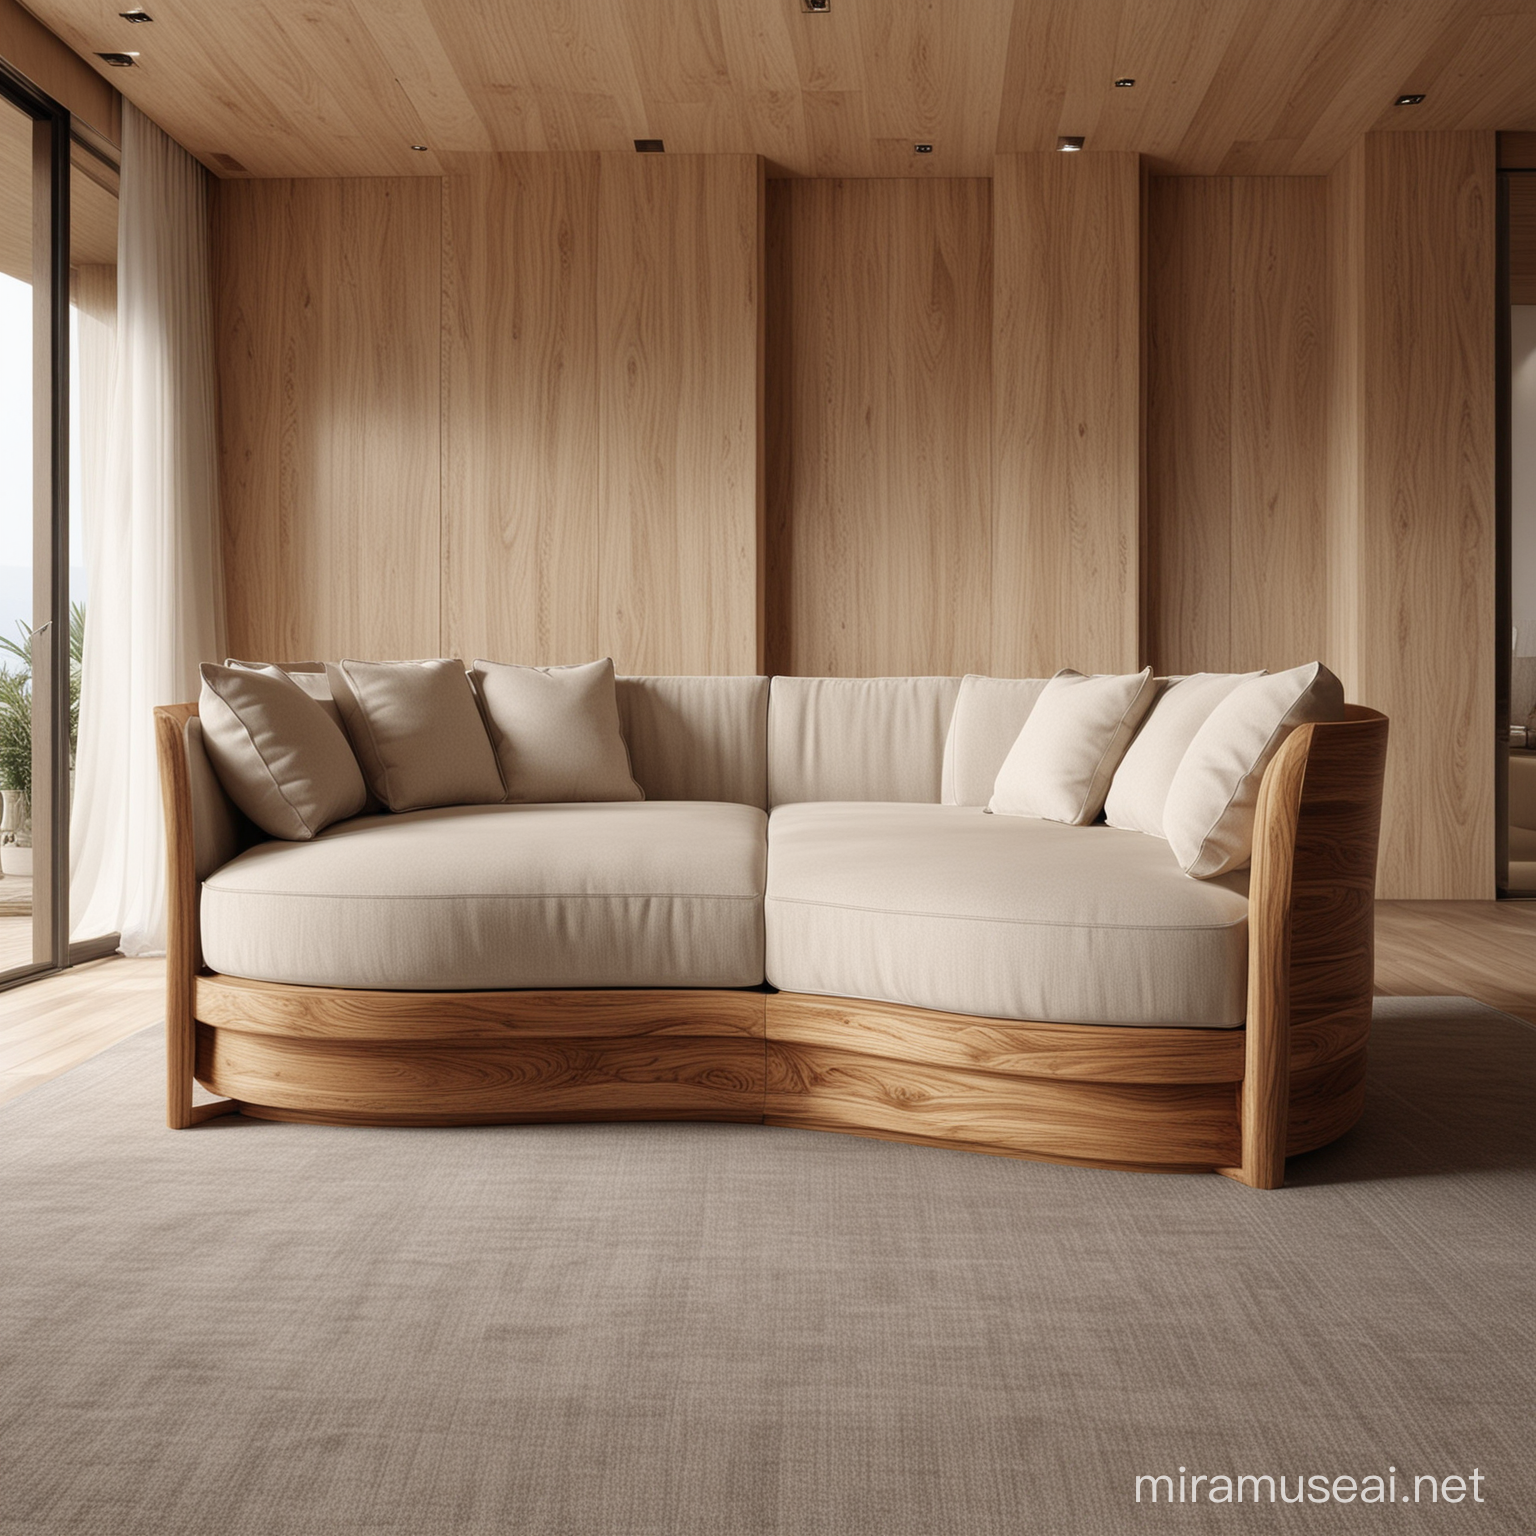 #visual #visualart #digitalart #setdesign
#furniture #sofa #sofas# very well designed very small amount oval wooden details showing the outline of the sofa   #furnitures #homedesign_ #homedecoration #coronarender #livingroom #interiordesign_ #2024furnituredesign #furniture #sofa set #decoration #homedecoration#rendertrends #Perfect view from 85° angle#renderarchitecture #modern wooden sofa art#architecture_#architecturephotography #architecture_best#architecture_lovers #architecturestudents#architecturaldigest #architecturevisualization#perspectief view #architectureape #finearchitecture#architecturetravel#architecturebuilding#renderlovers#interiordesignerslife_#interiordesigninspiration#interiordesigntrends#interiordesignblog#interiordesignersofinstagram_#interiordesignerlife#interiordesignblogger#interiordesignmag#interiordesignlover#interiordesignmag#interiordesignaddict#midjourney